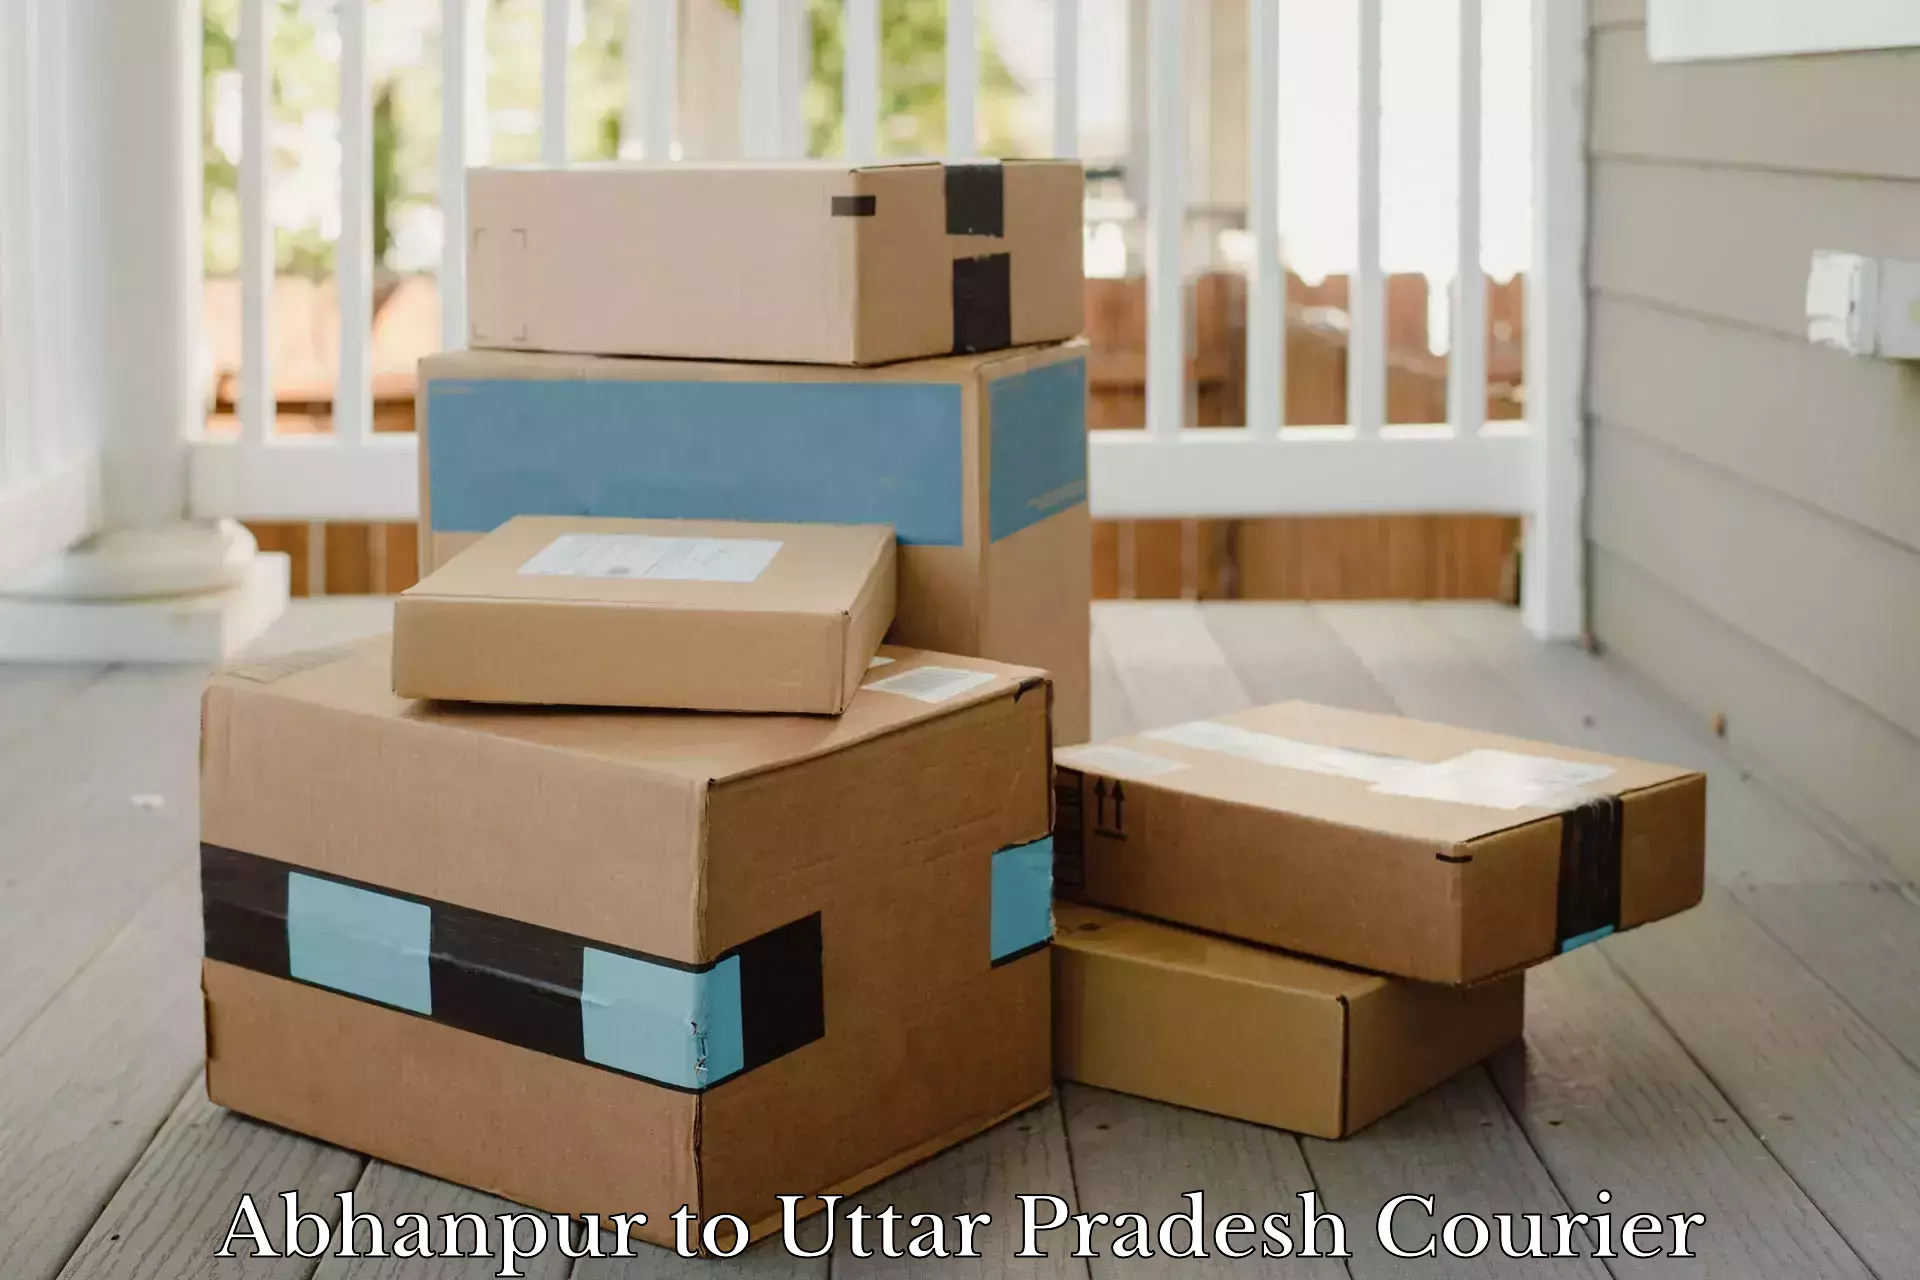 Customizable shipping options Abhanpur to Fatehabad Agra